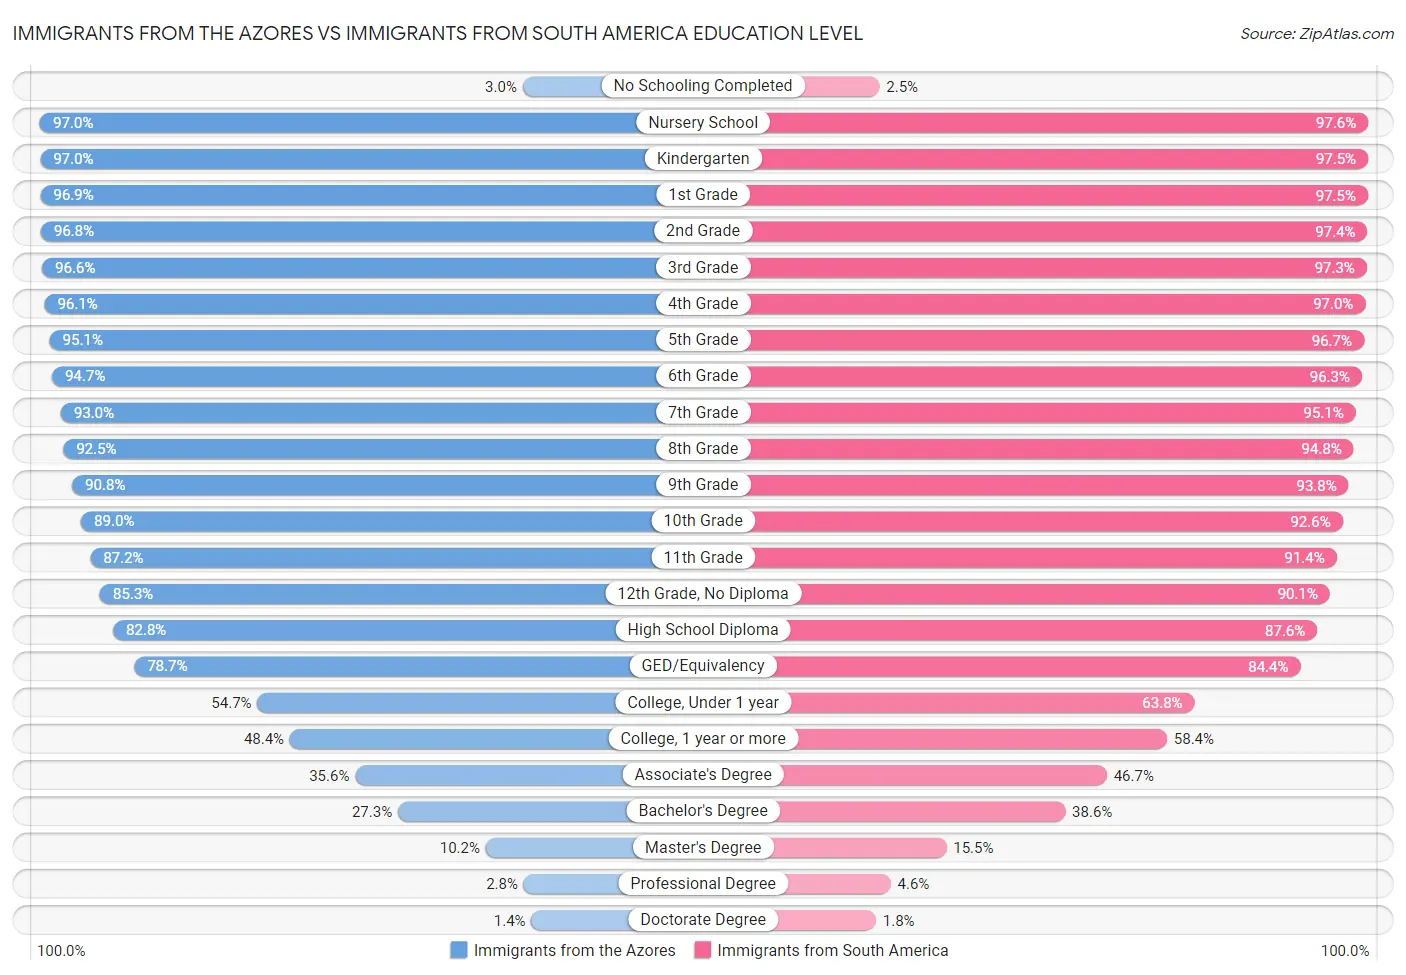 Immigrants from the Azores vs Immigrants from South America Education Level